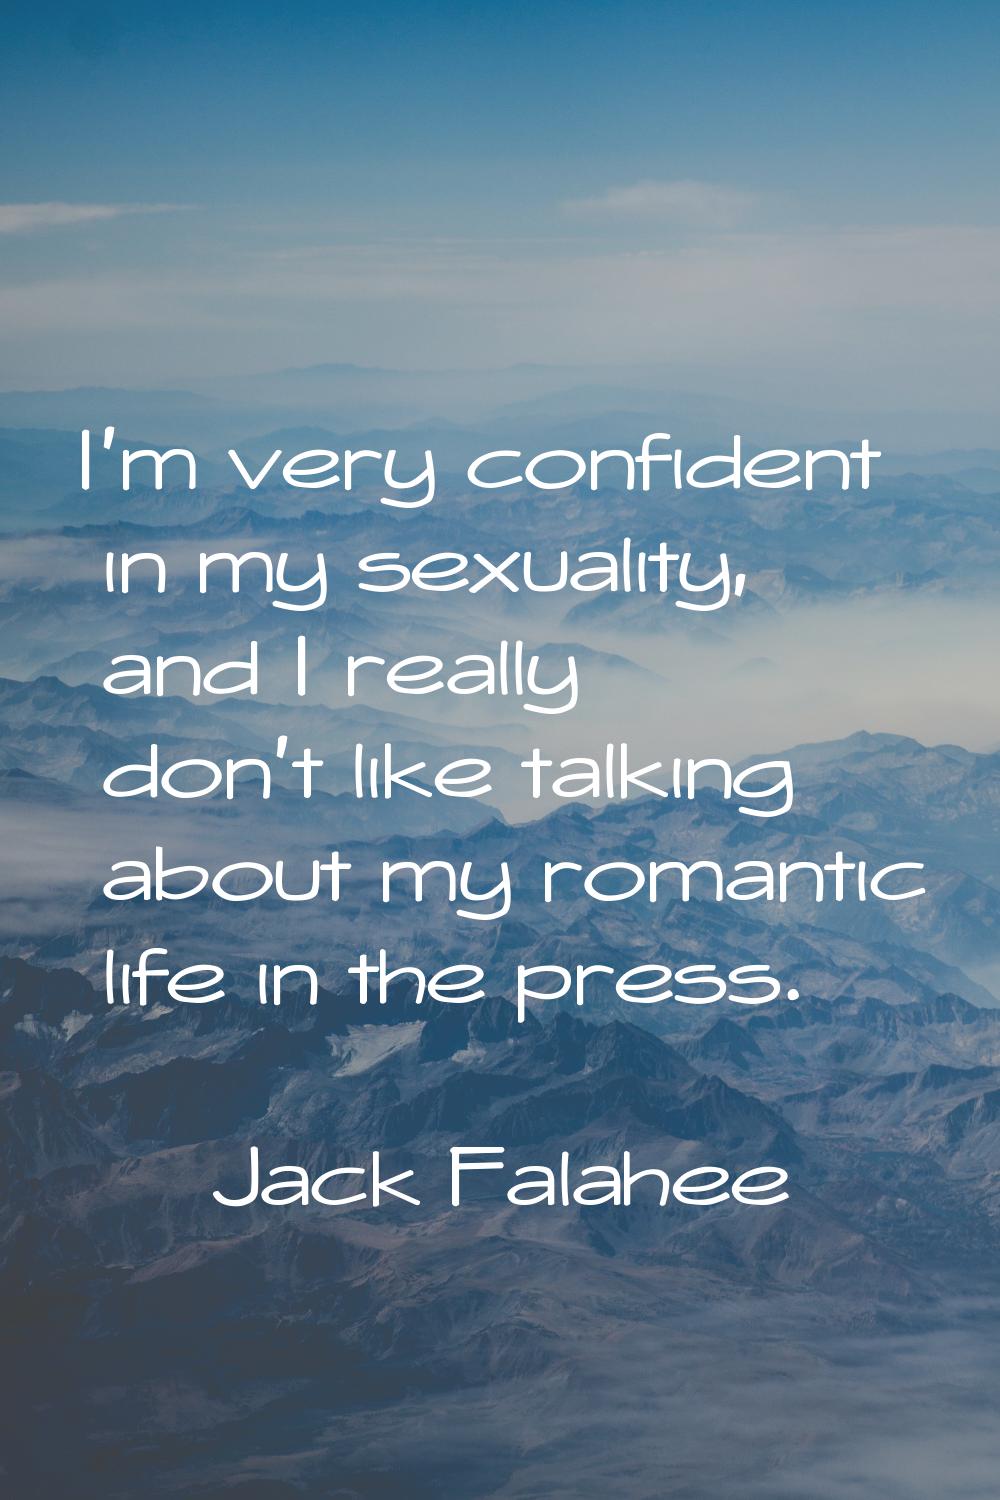 I'm very confident in my sexuality, and I really don't like talking about my romantic life in the p